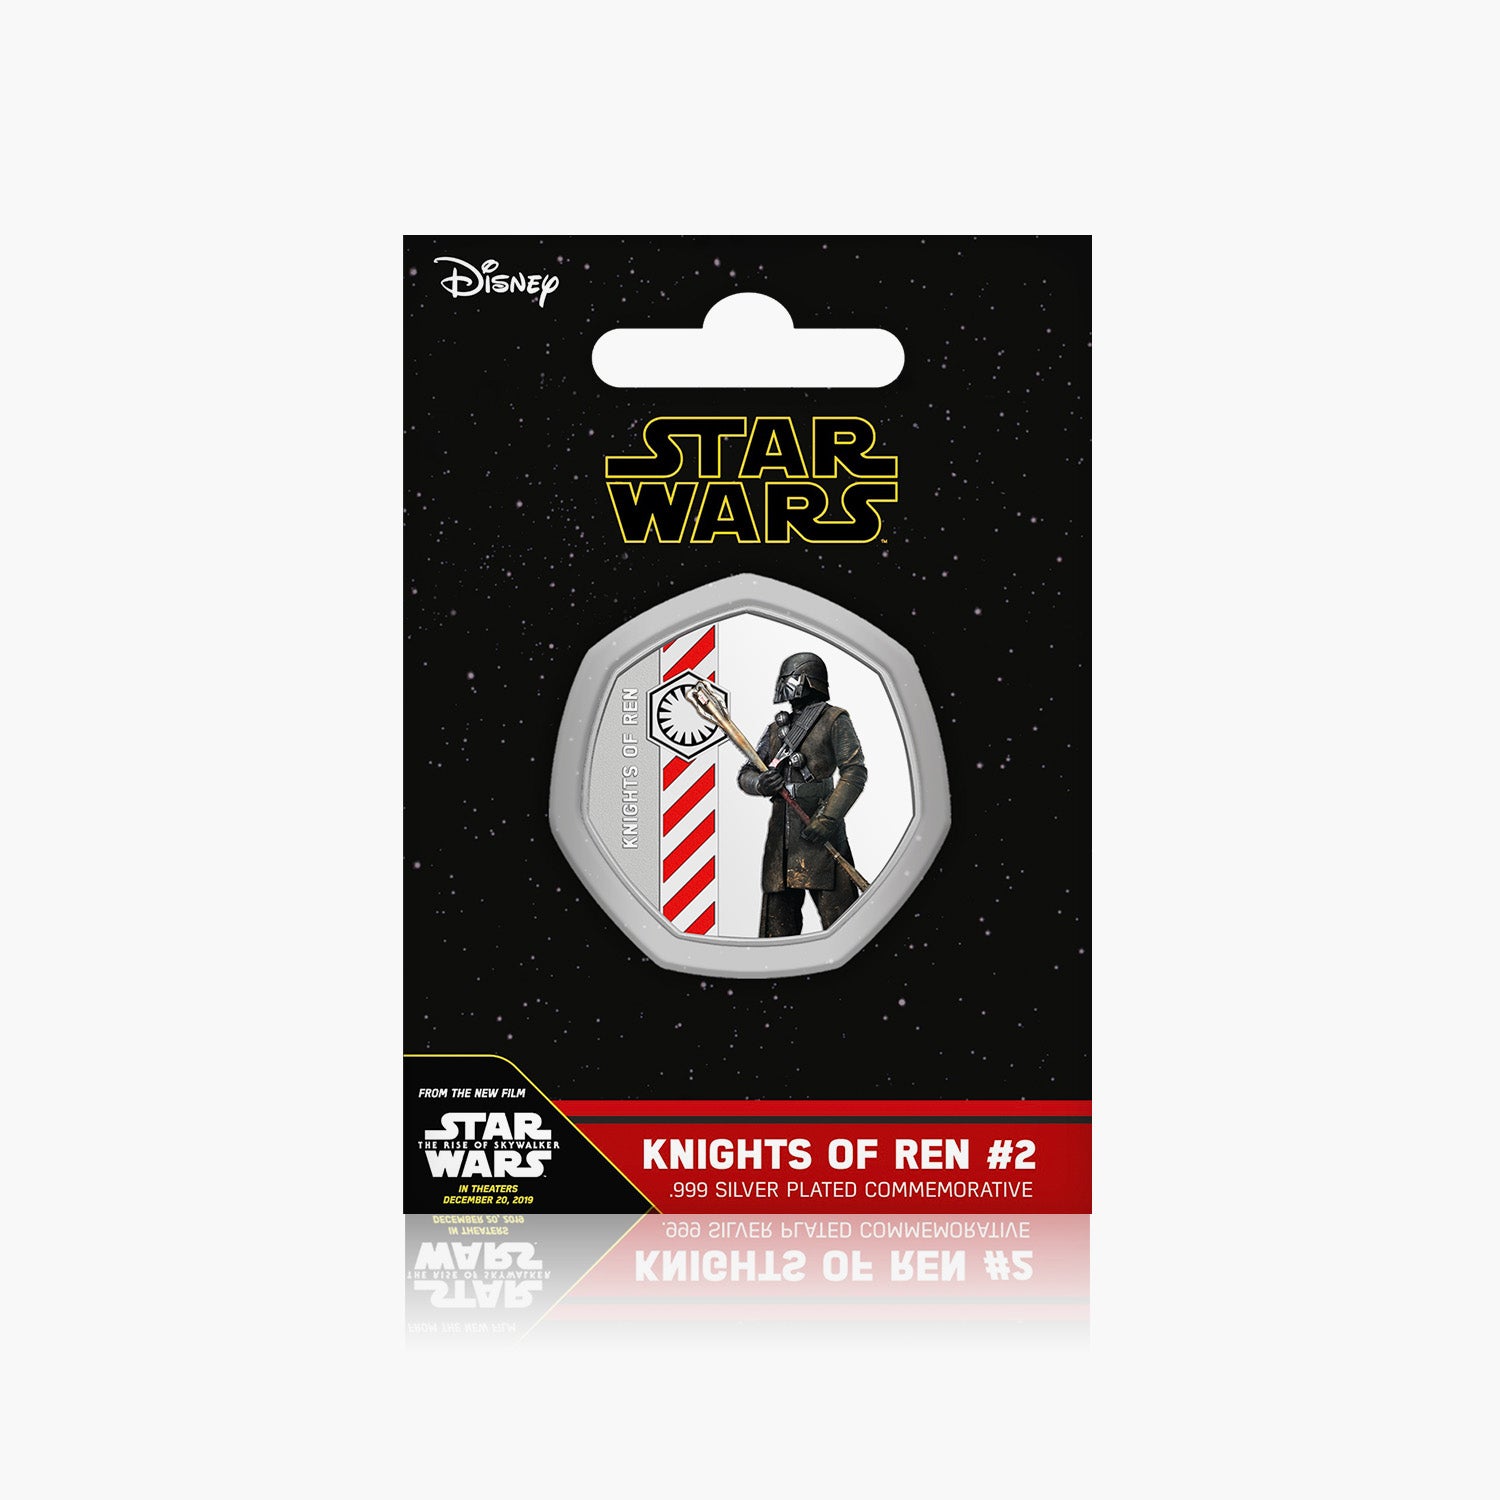 Knights of Ren #2 Silver-Plated Commemorative